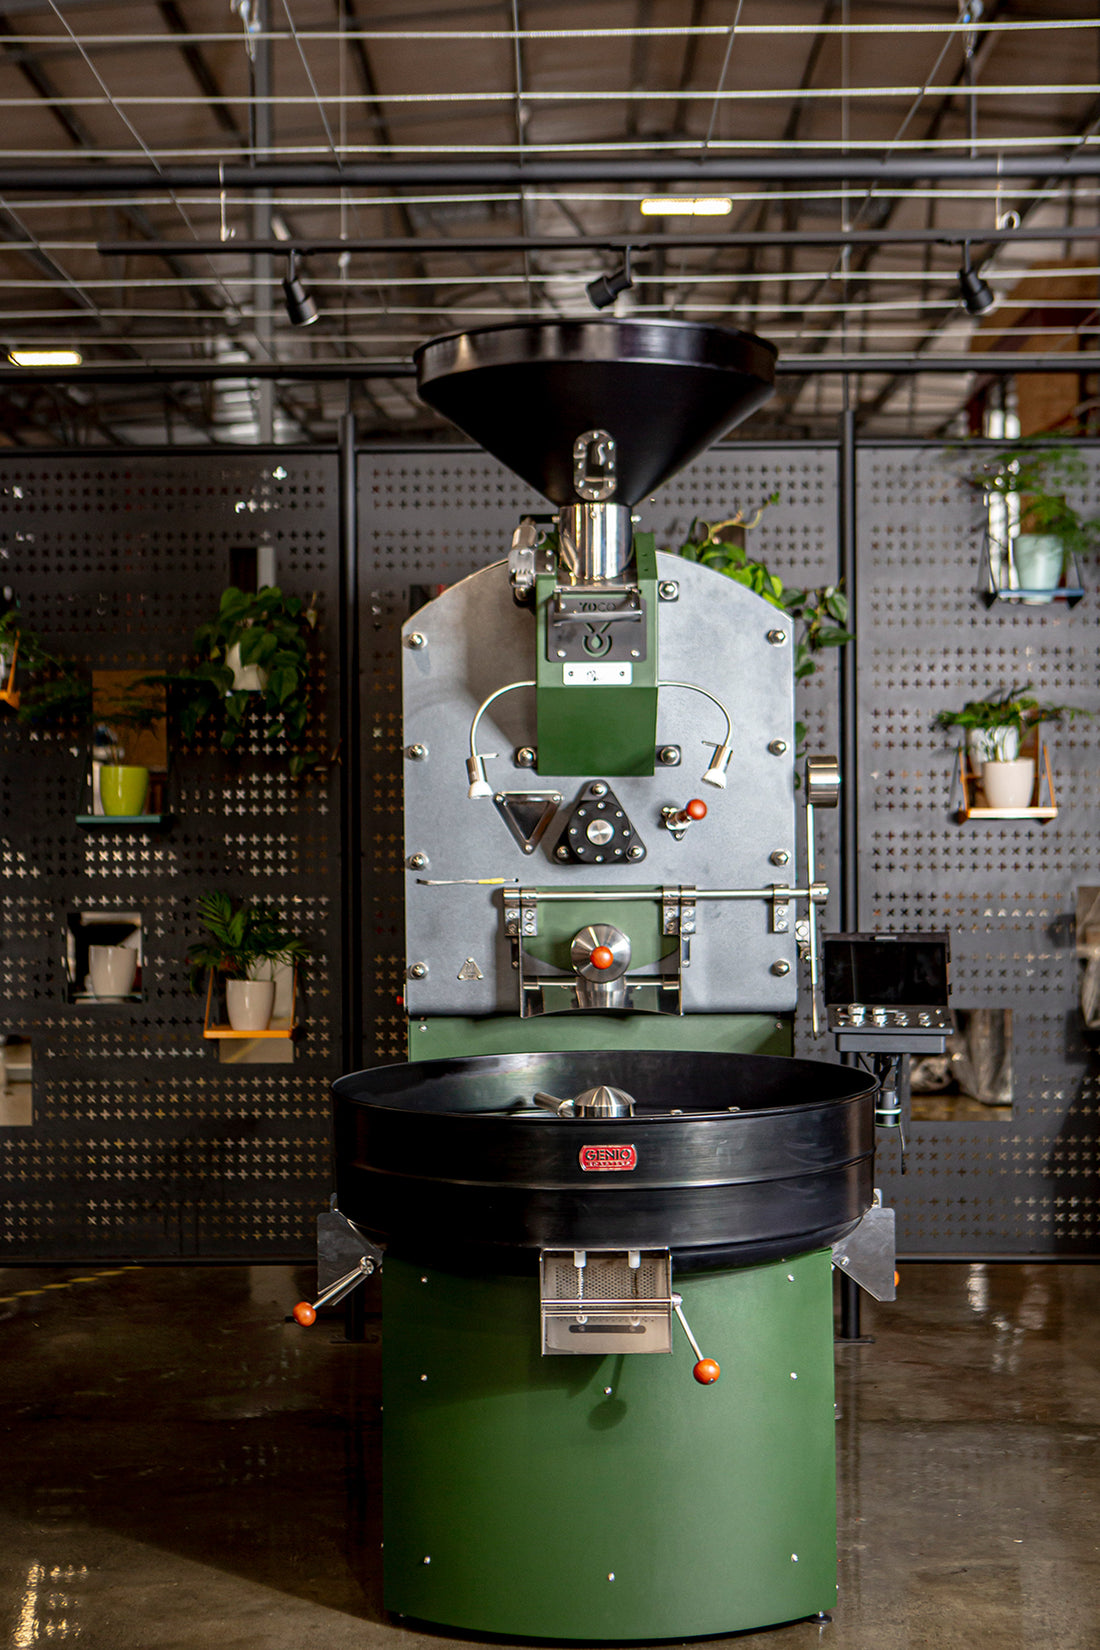 Genio 30 Coffee Roaster Machine seen from the front in green colour